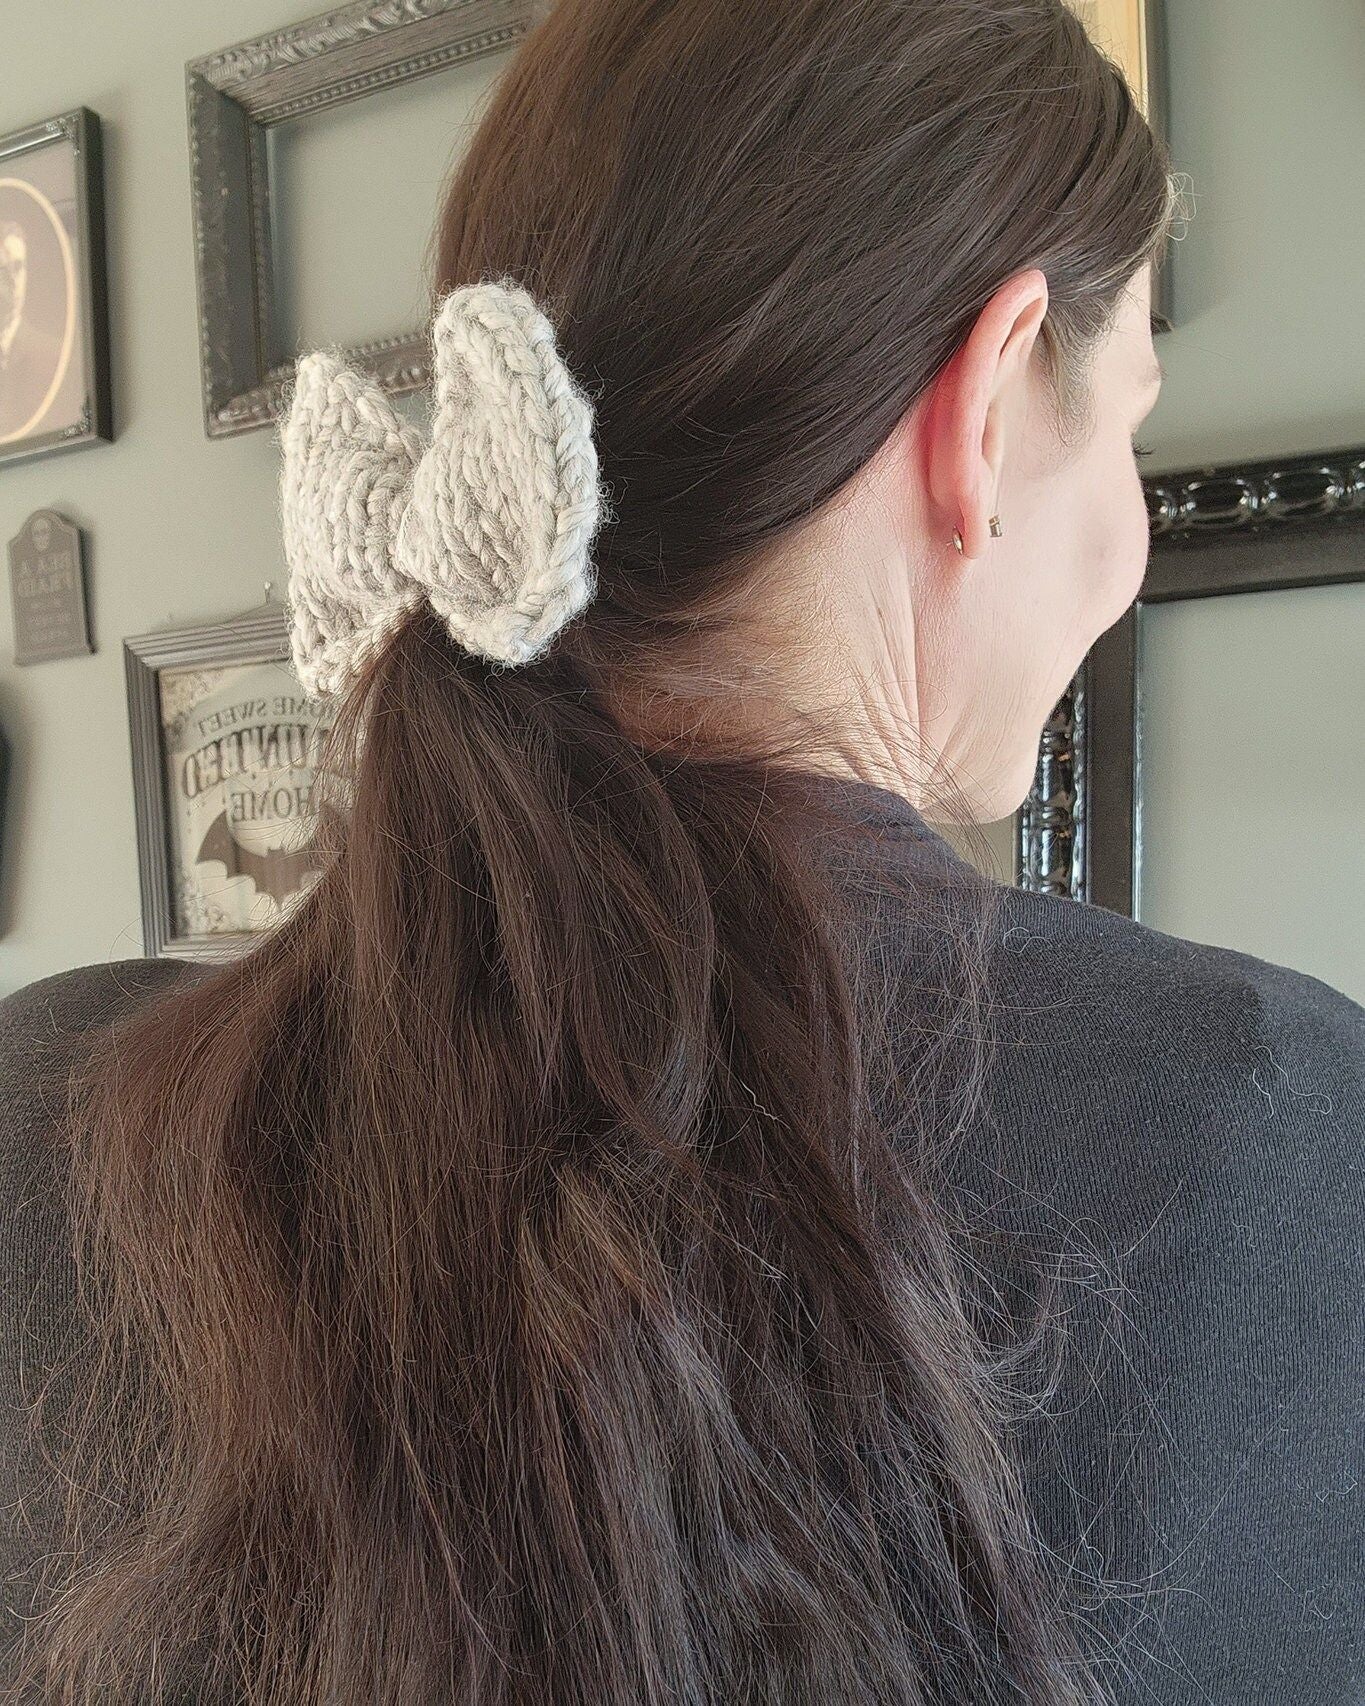 The "Ice Queen" Hand Knit Hair Bow